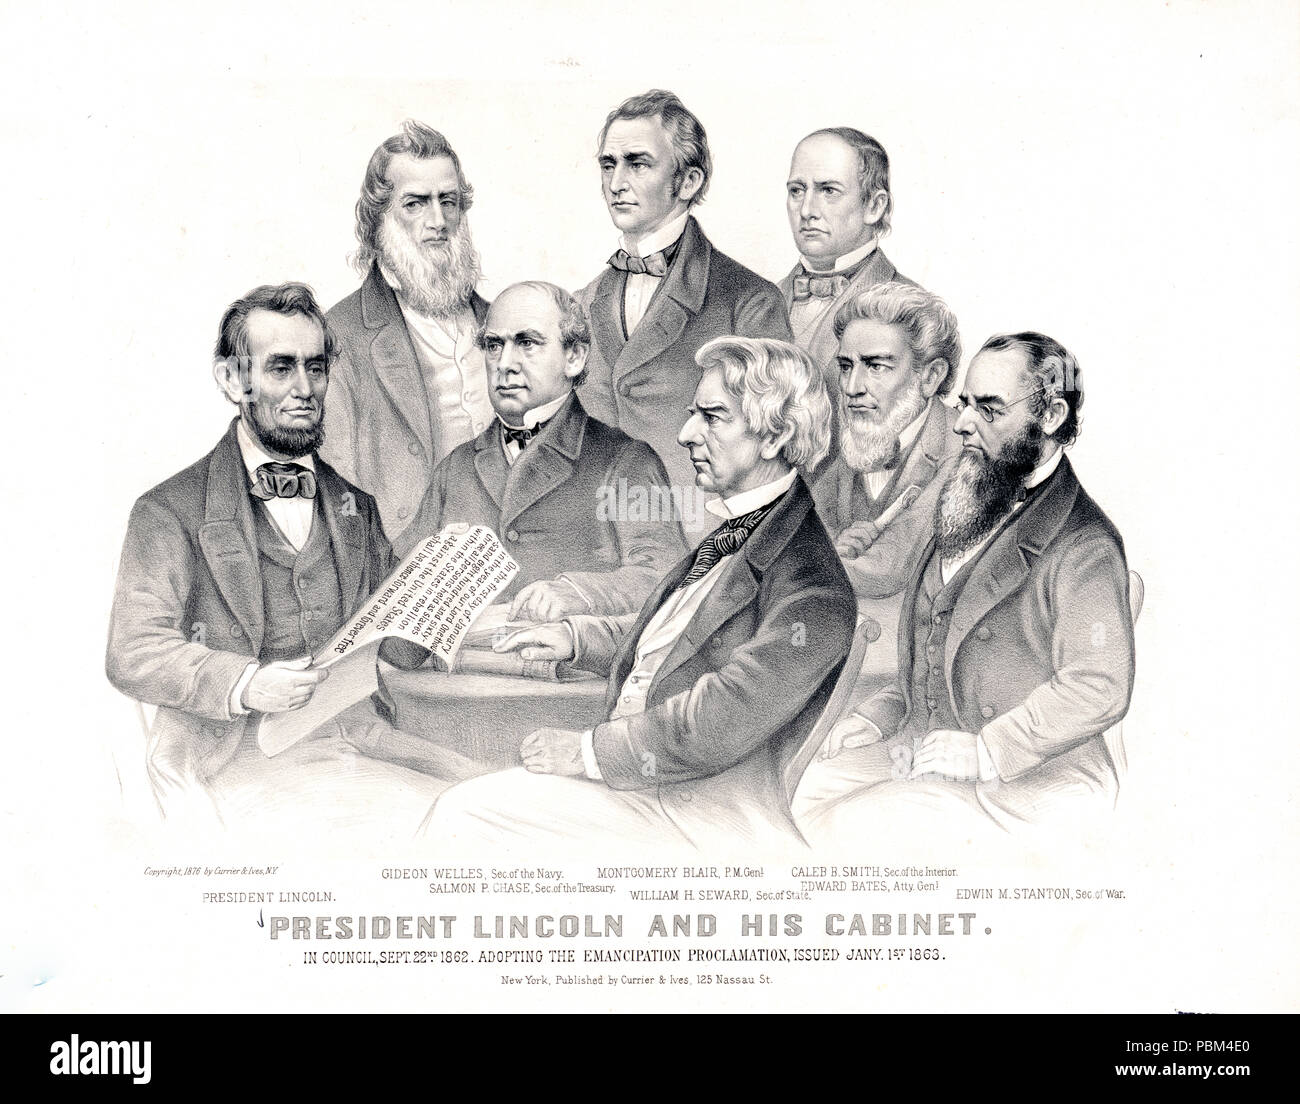 President Lincoln and his cabinet in council, Sept. 22nd 1862. adopting the Emancipation Proclamation, issued Jany. 1st 1863 Stock Photo